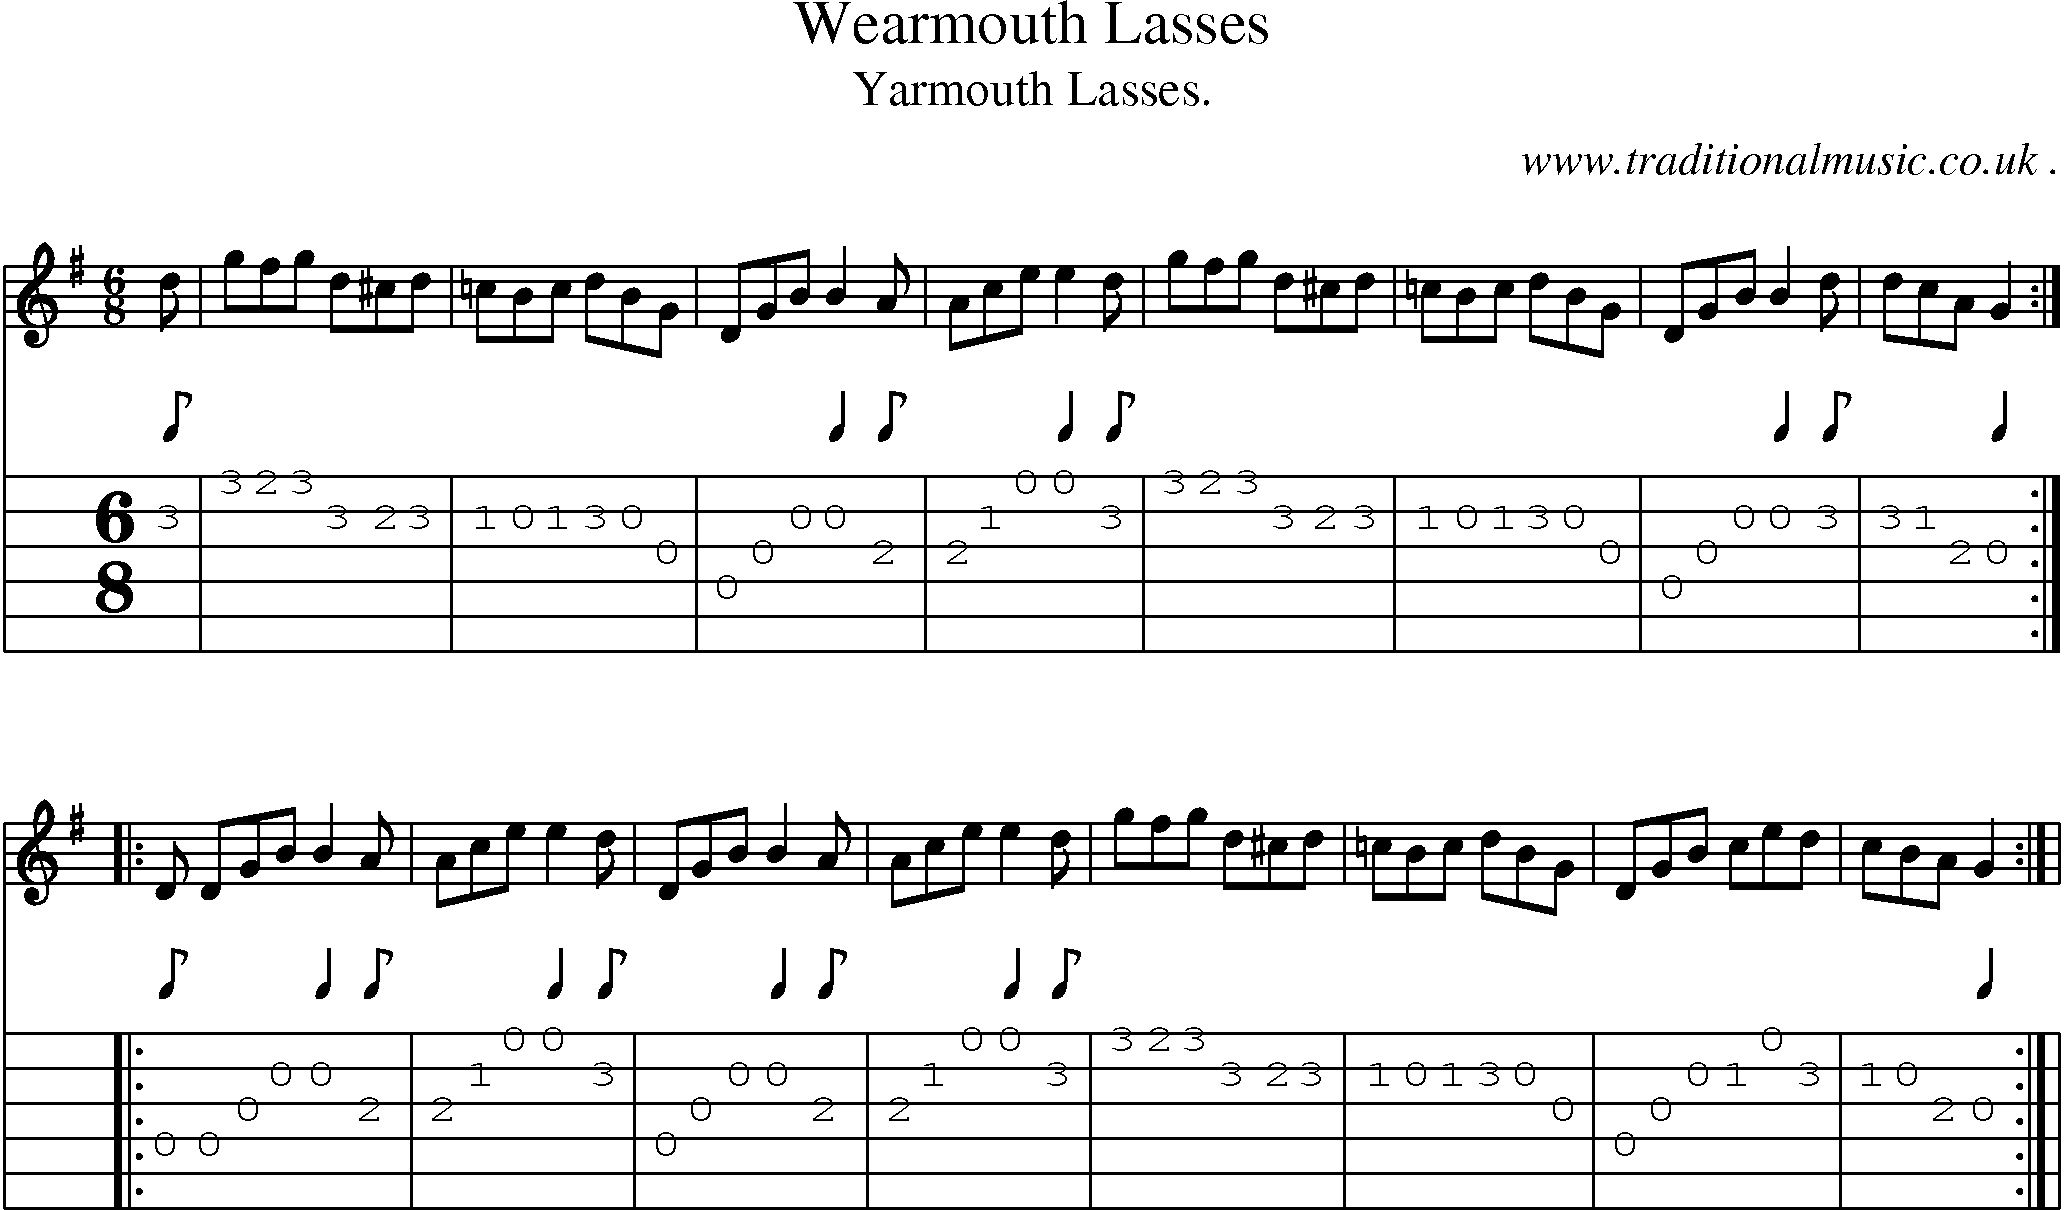 Sheet-Music and Guitar Tabs for Wearmouth Lasses